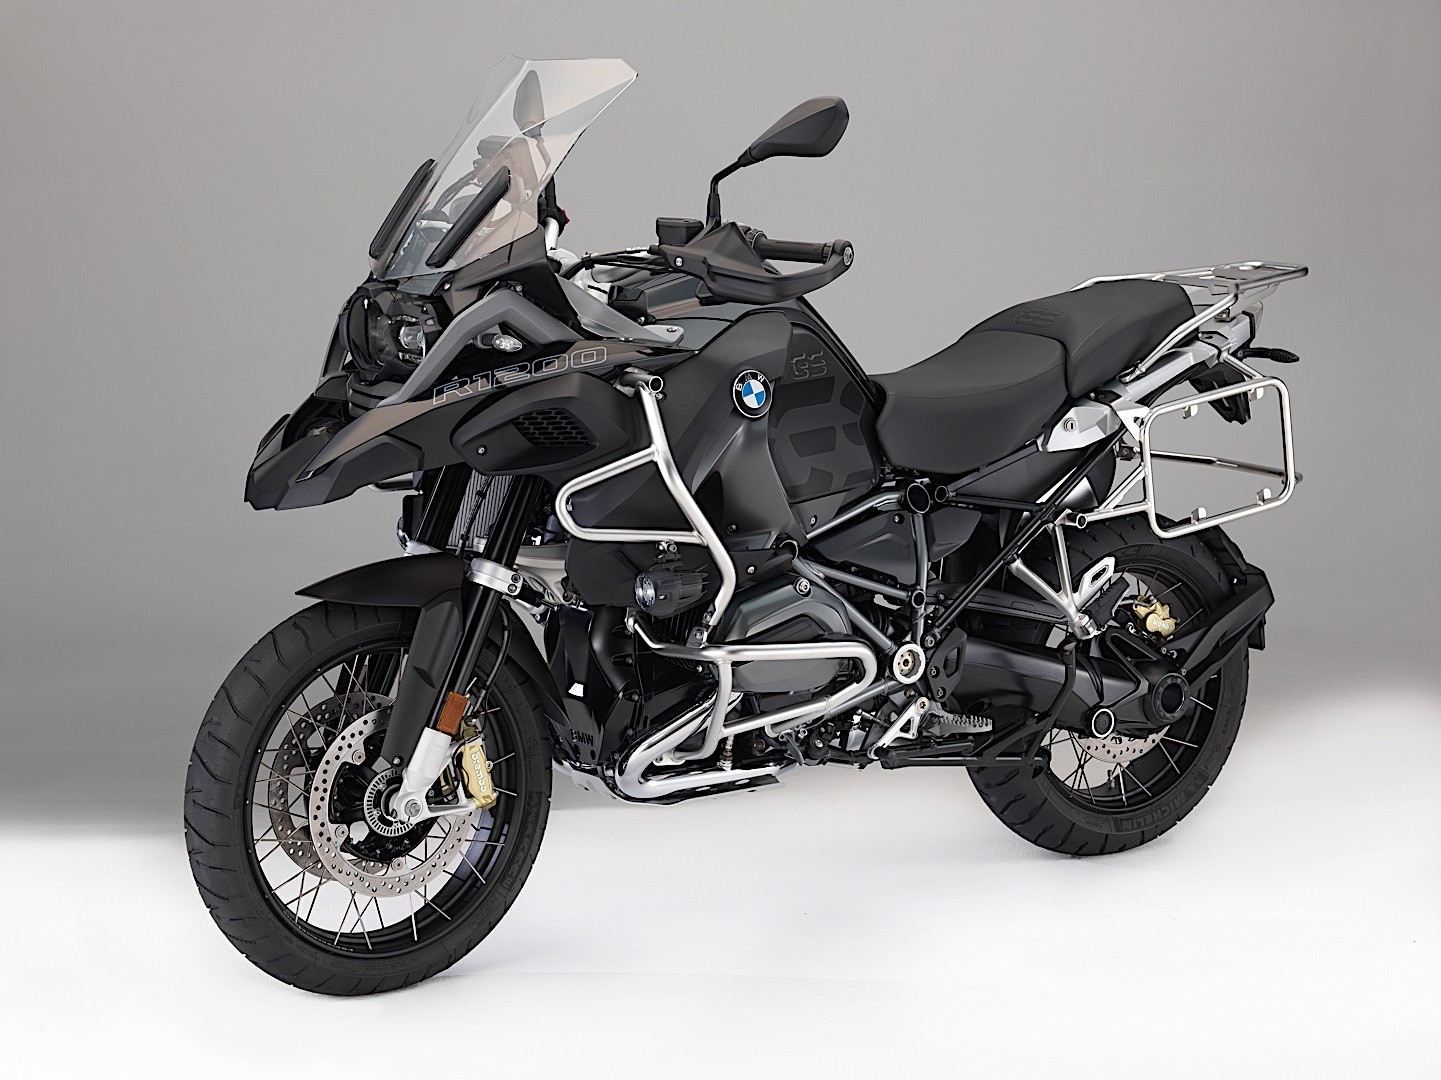 Almost all 2018 BMW Motorcycles Get Updates - autoevolution